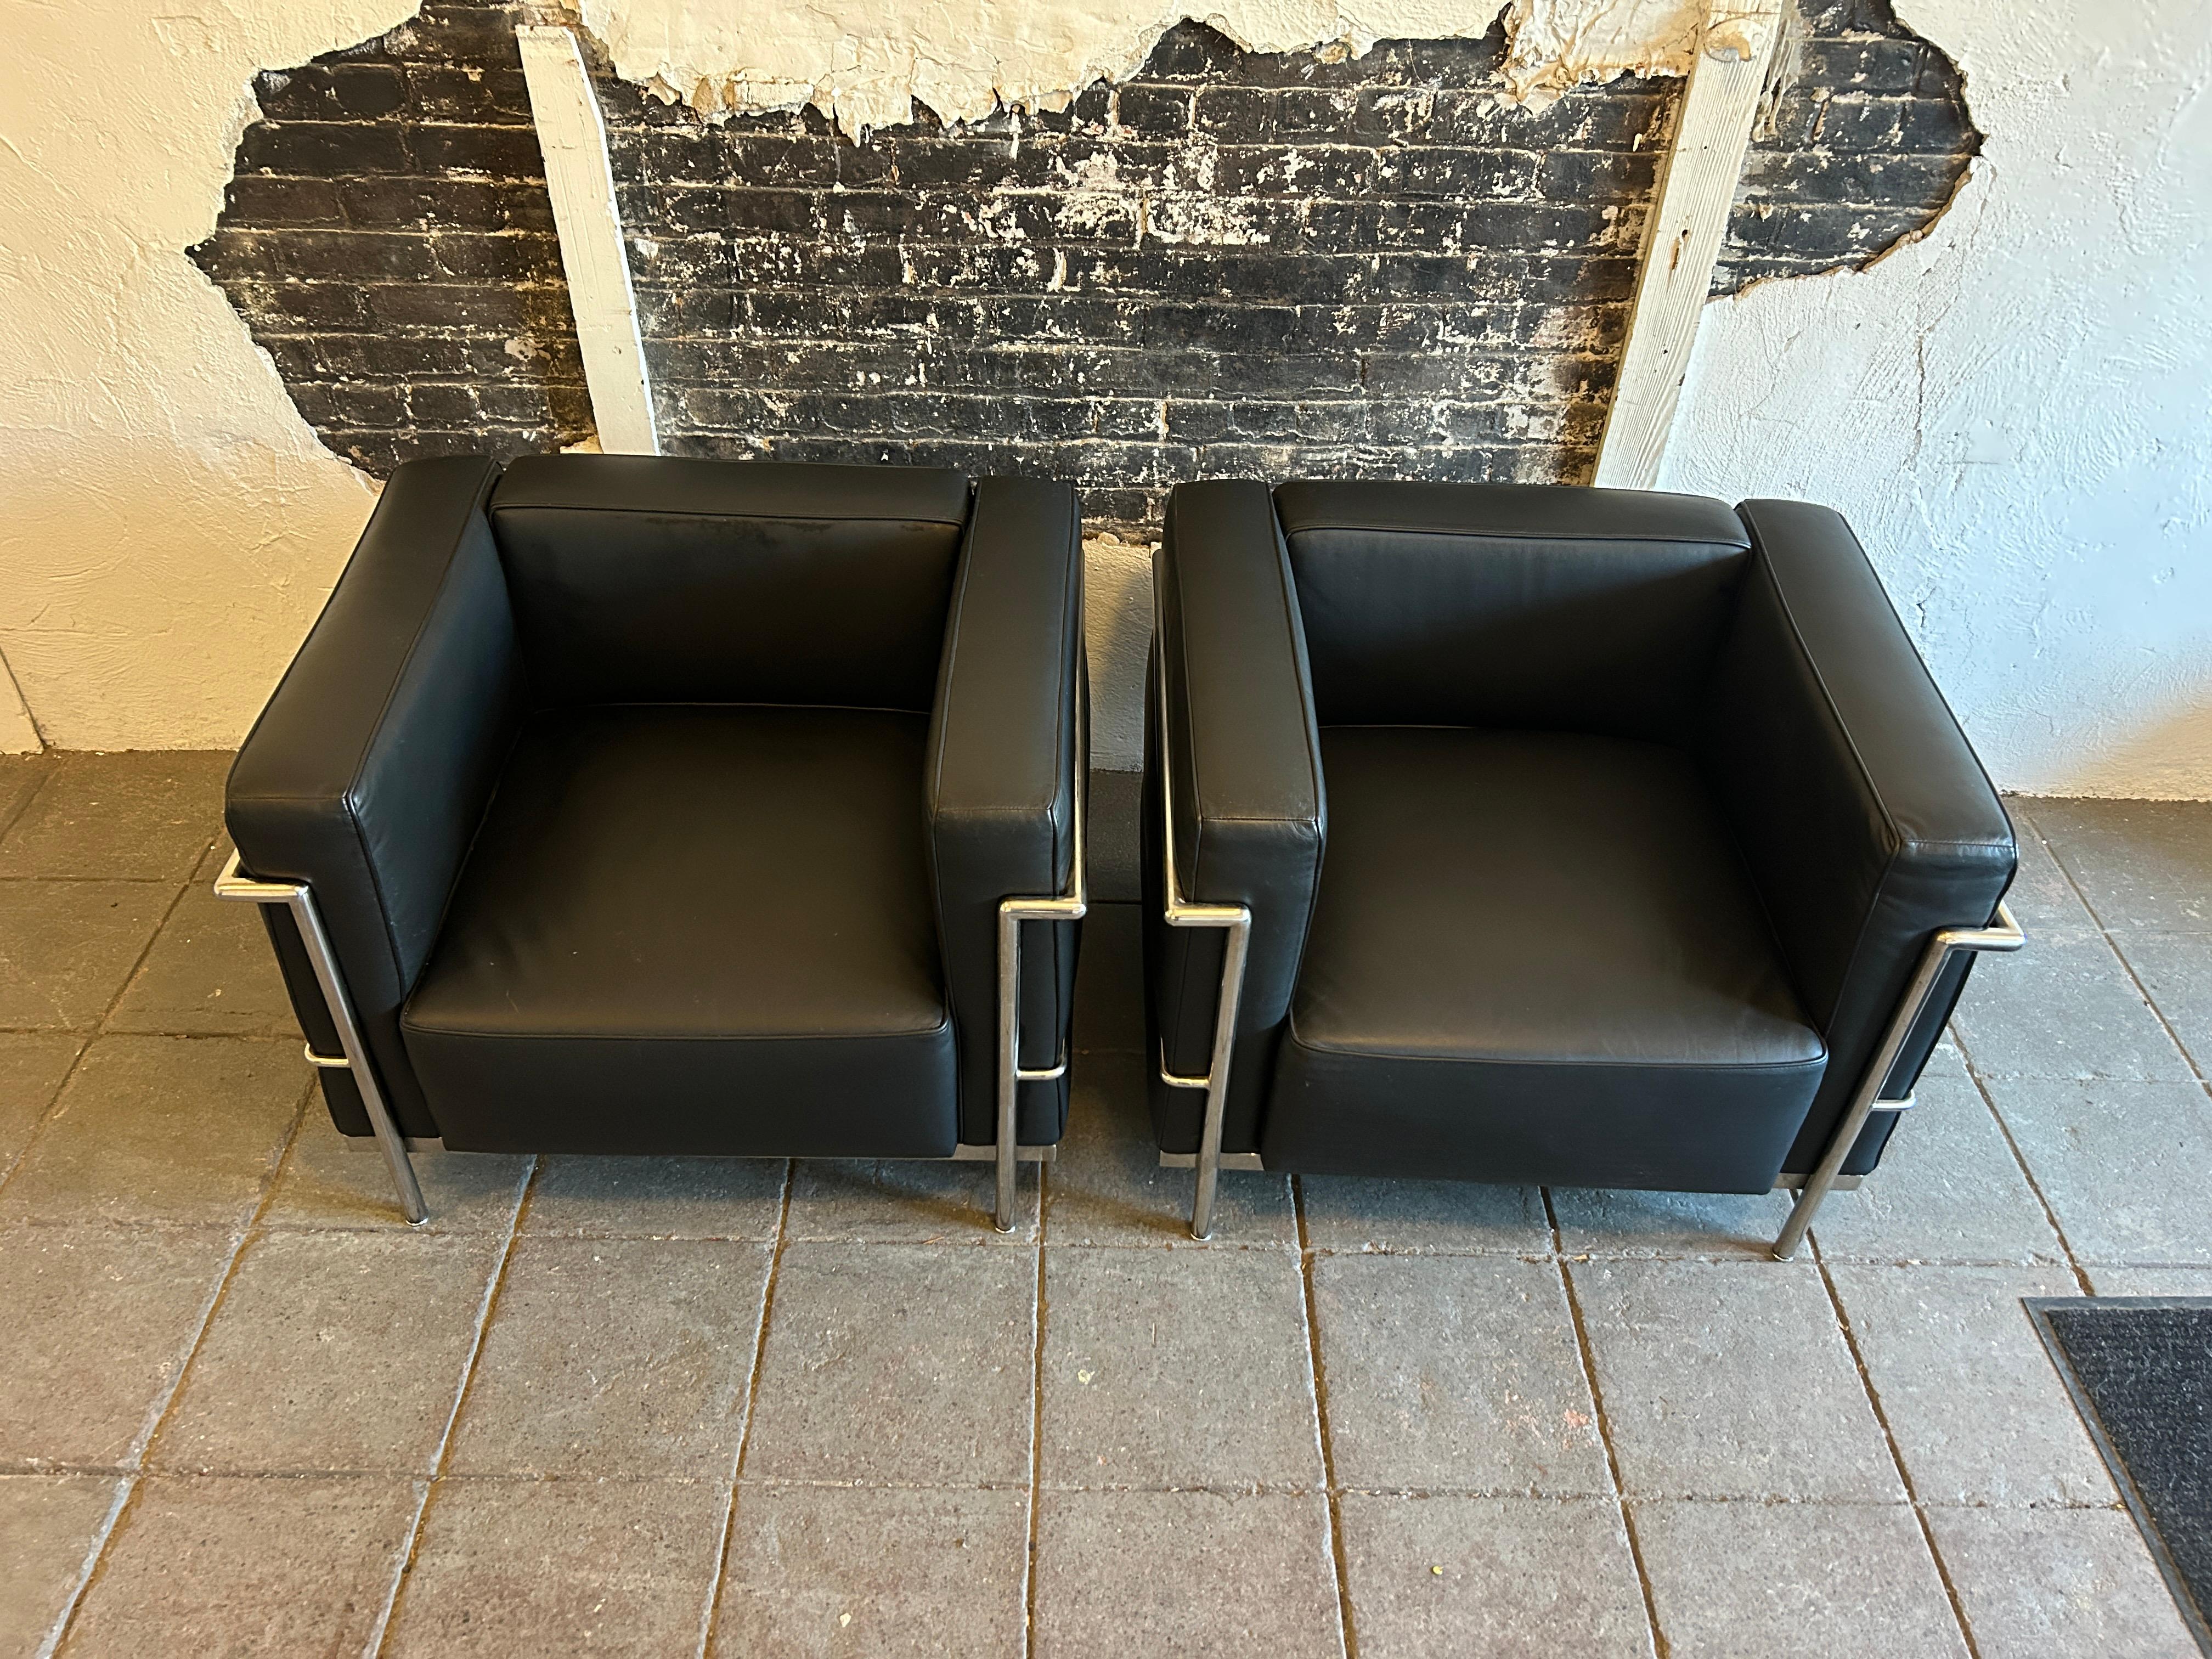 A pair of pre owned modern lounge or club chairs by Le Corbusier. Wide Model LC3 in soft black Leather. Triple chrome plated steel frames. Show little to no signs of use. Made in italy. Located in Brooklyn NYC.

Sold as (1) Pair Set of (2) Chairs as